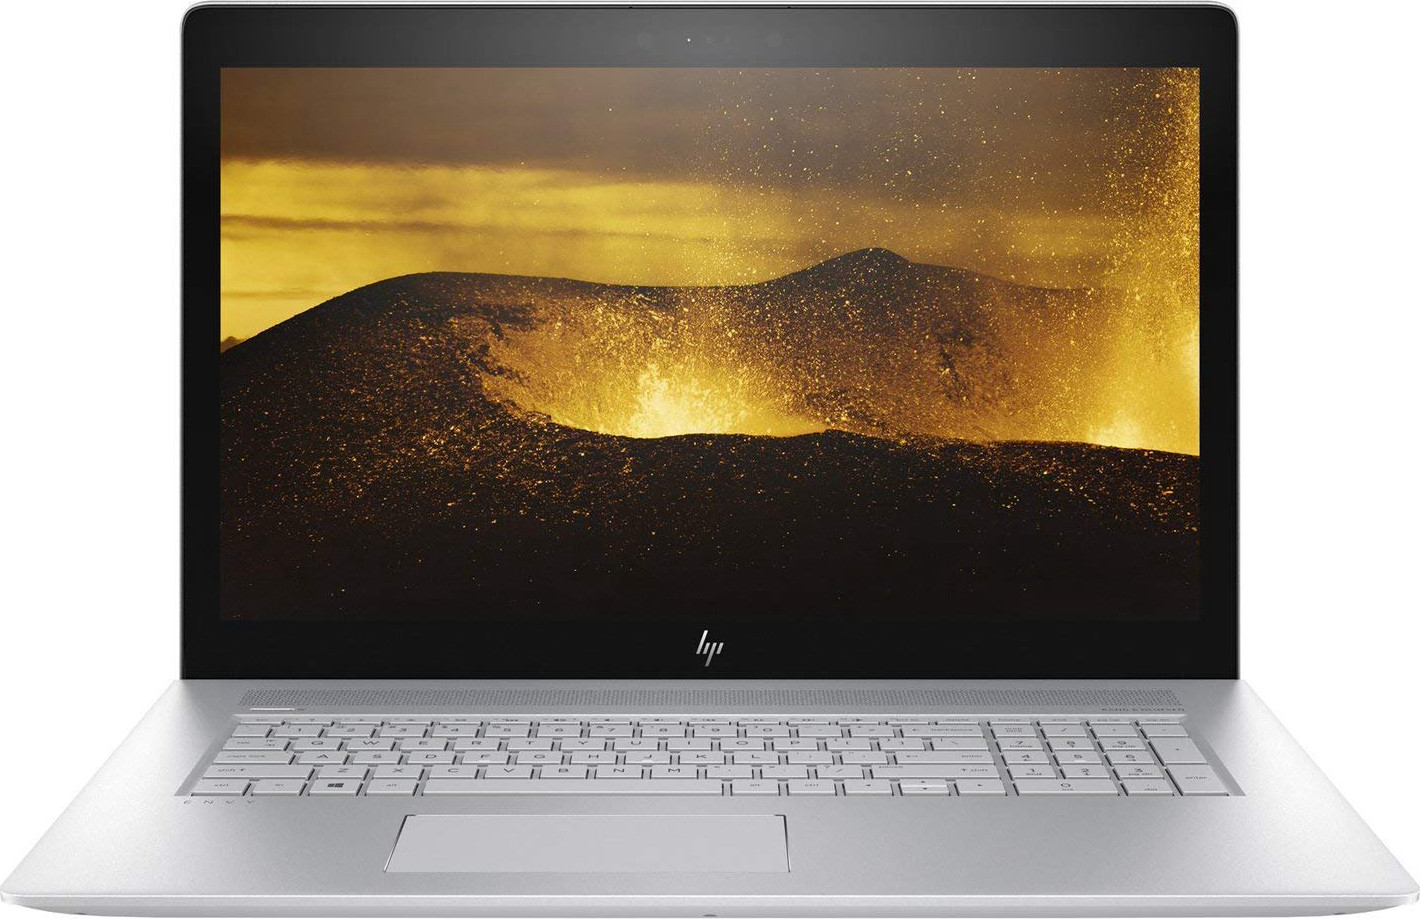 HP Envy 17T Touch Intel Core i7-8550U Quad Core, 512GB SSD, 16GB RAM, Win 10 Pro HP Installed, 17.3 FHD touch, Nvidia 4GB DDR5,B&O speakers, Mcafee 3 Years Internet Security, WideVision HD Cam(not IR)